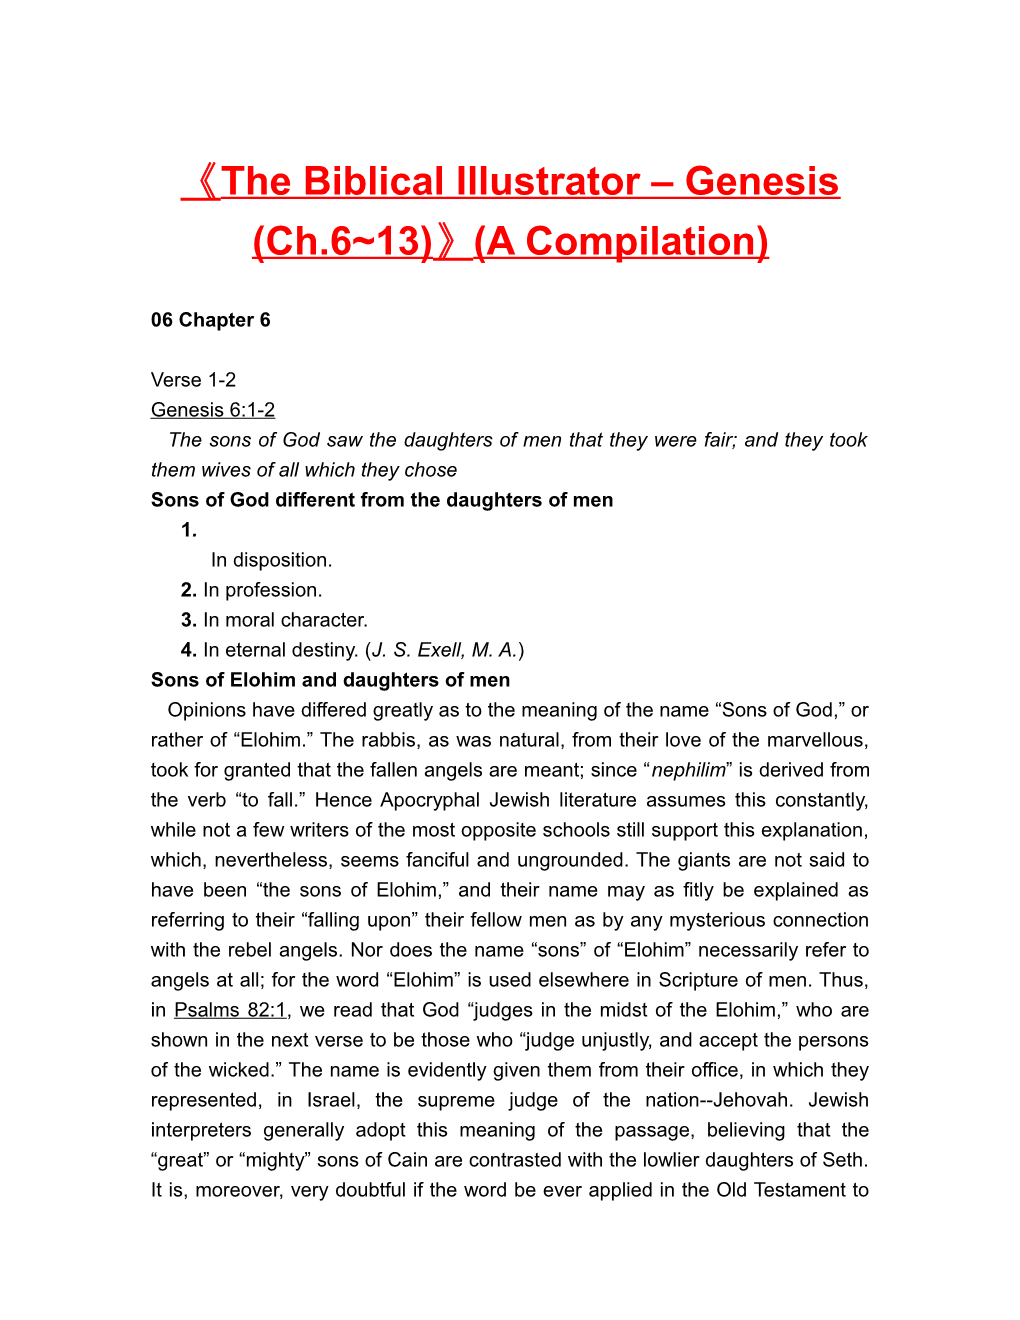 The Biblical Illustrator Genesis (Ch.6 13) (A Compilation)